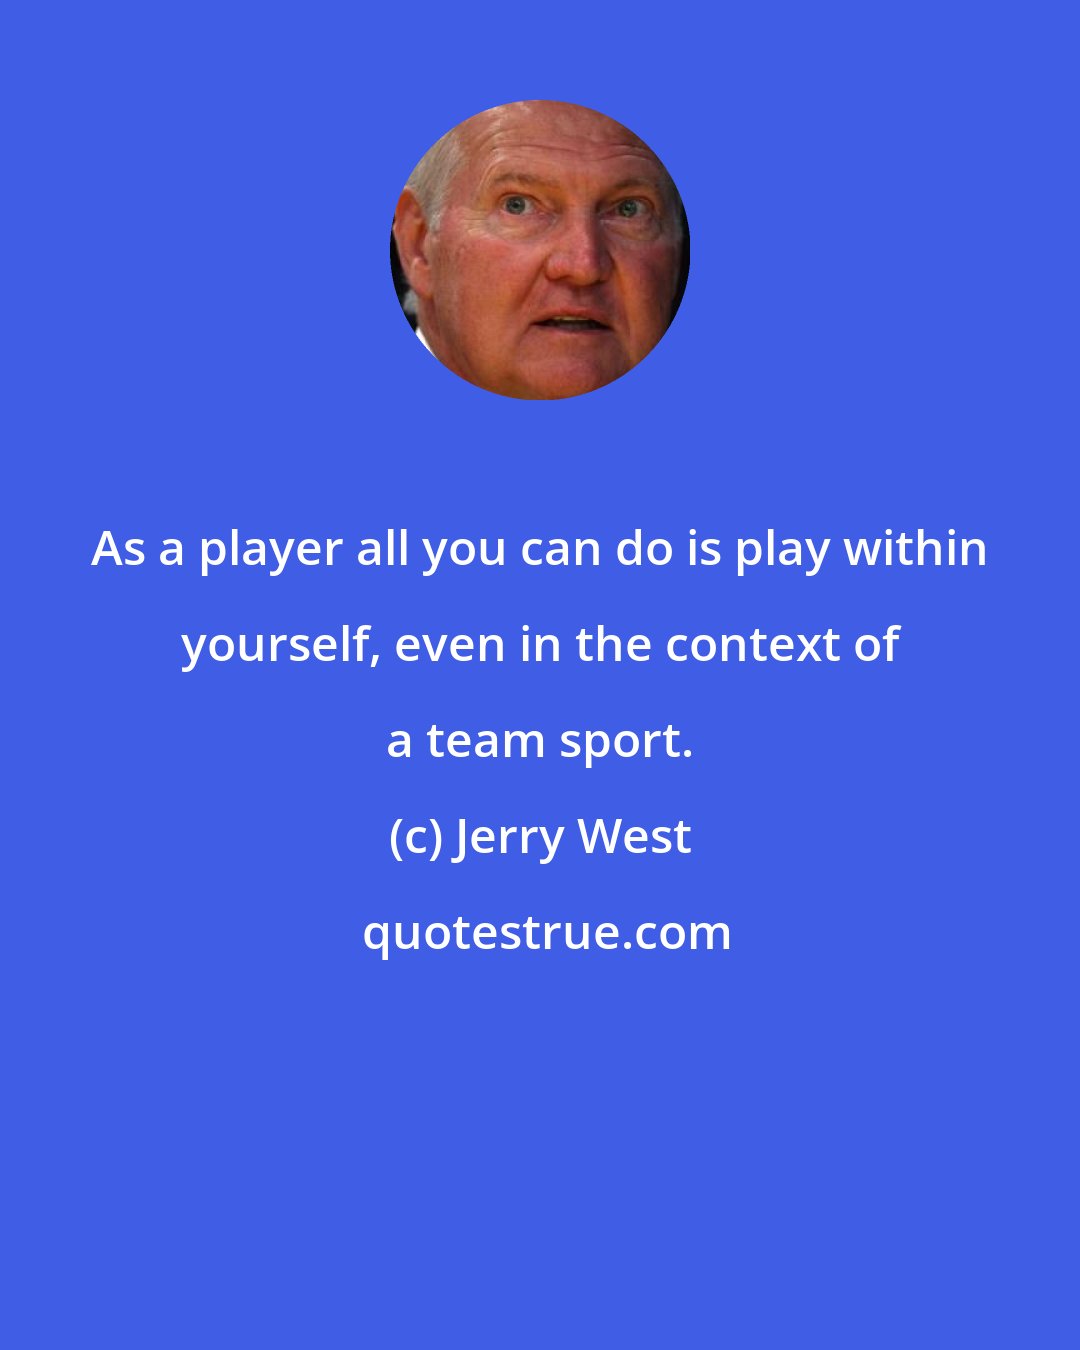 Jerry West: As a player all you can do is play within yourself, even in the context of a team sport.